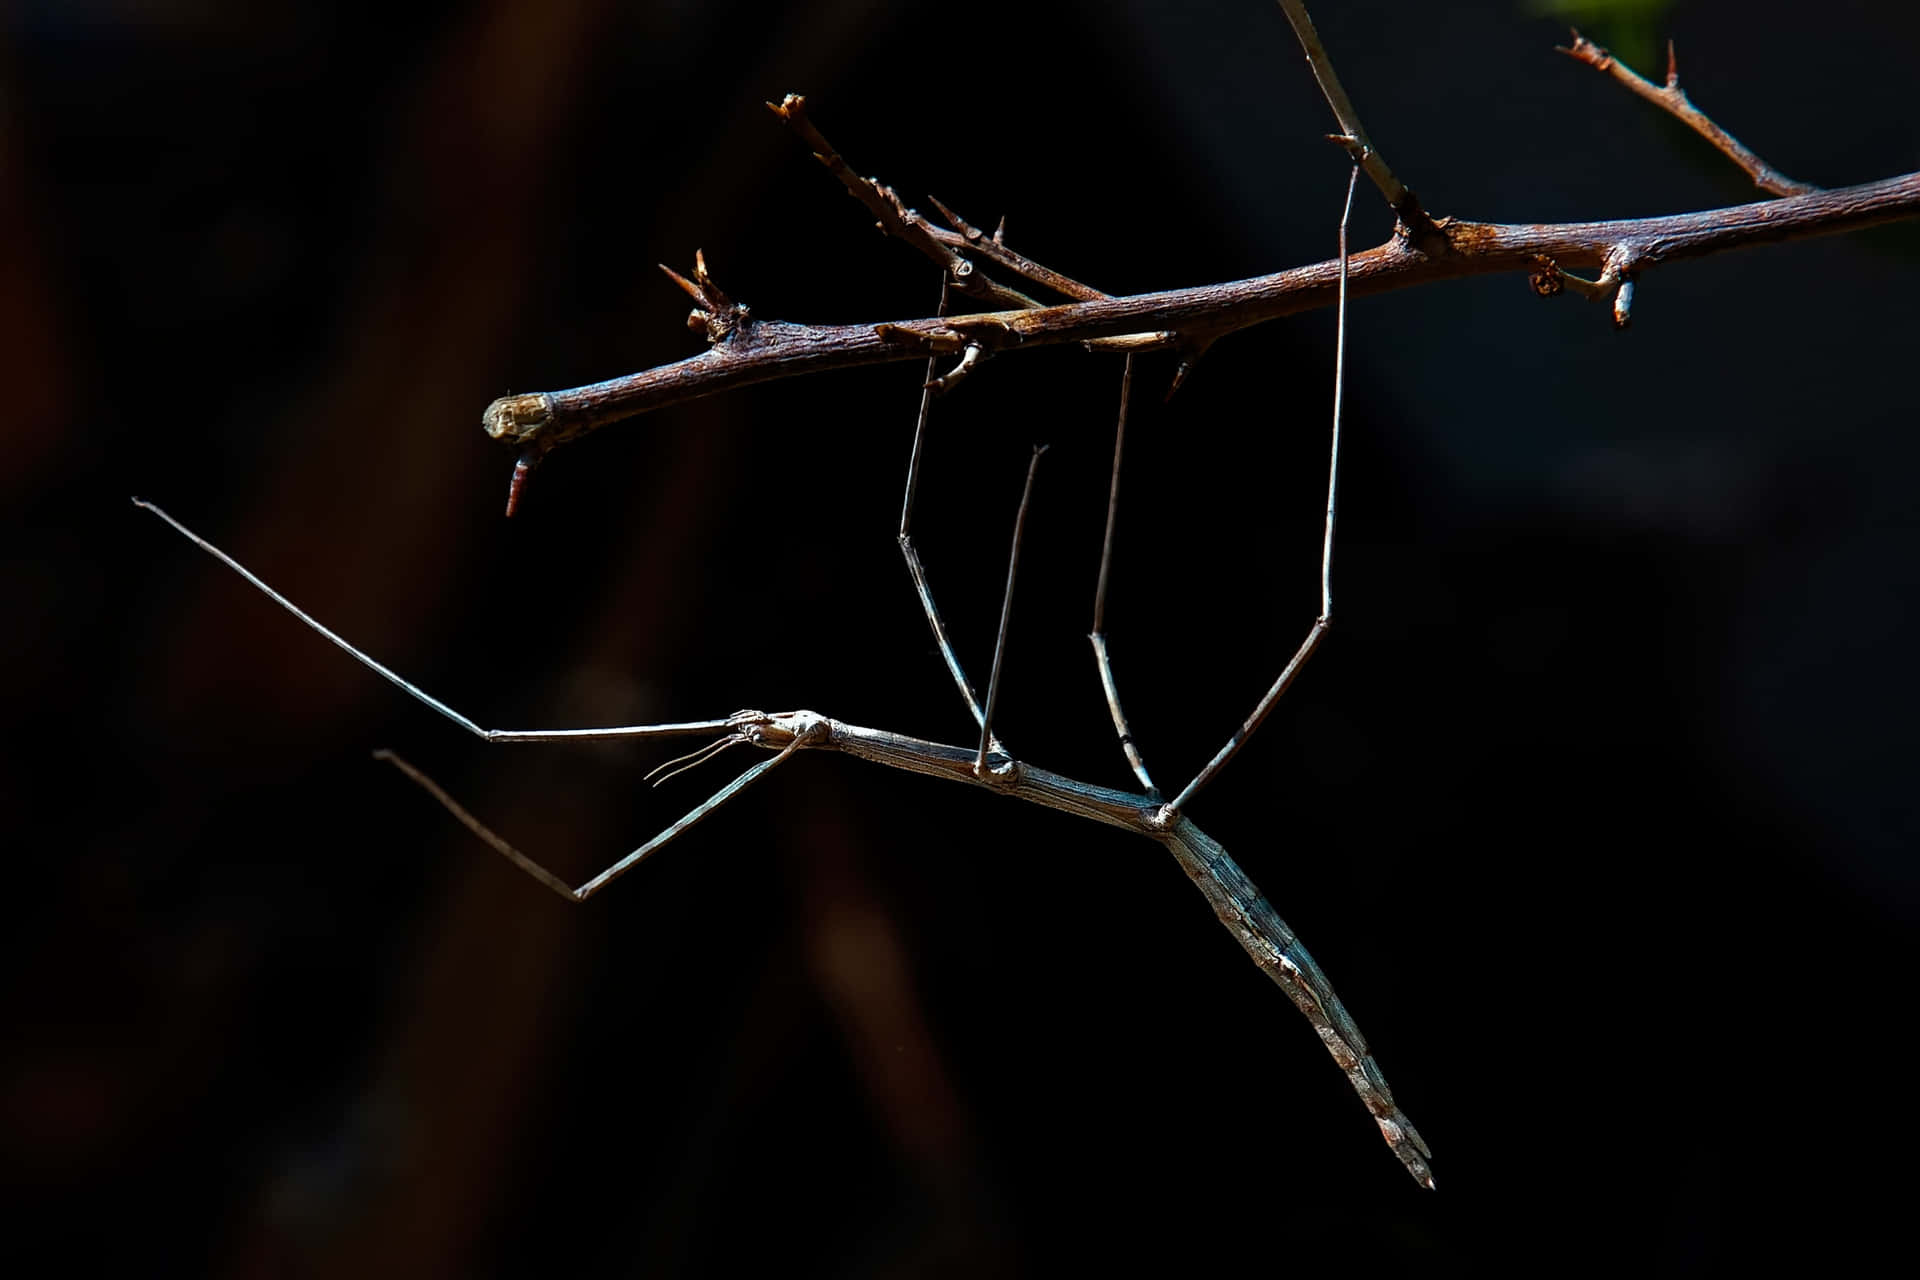 Walkingstick Insect Camouflage Nature Wallpaper